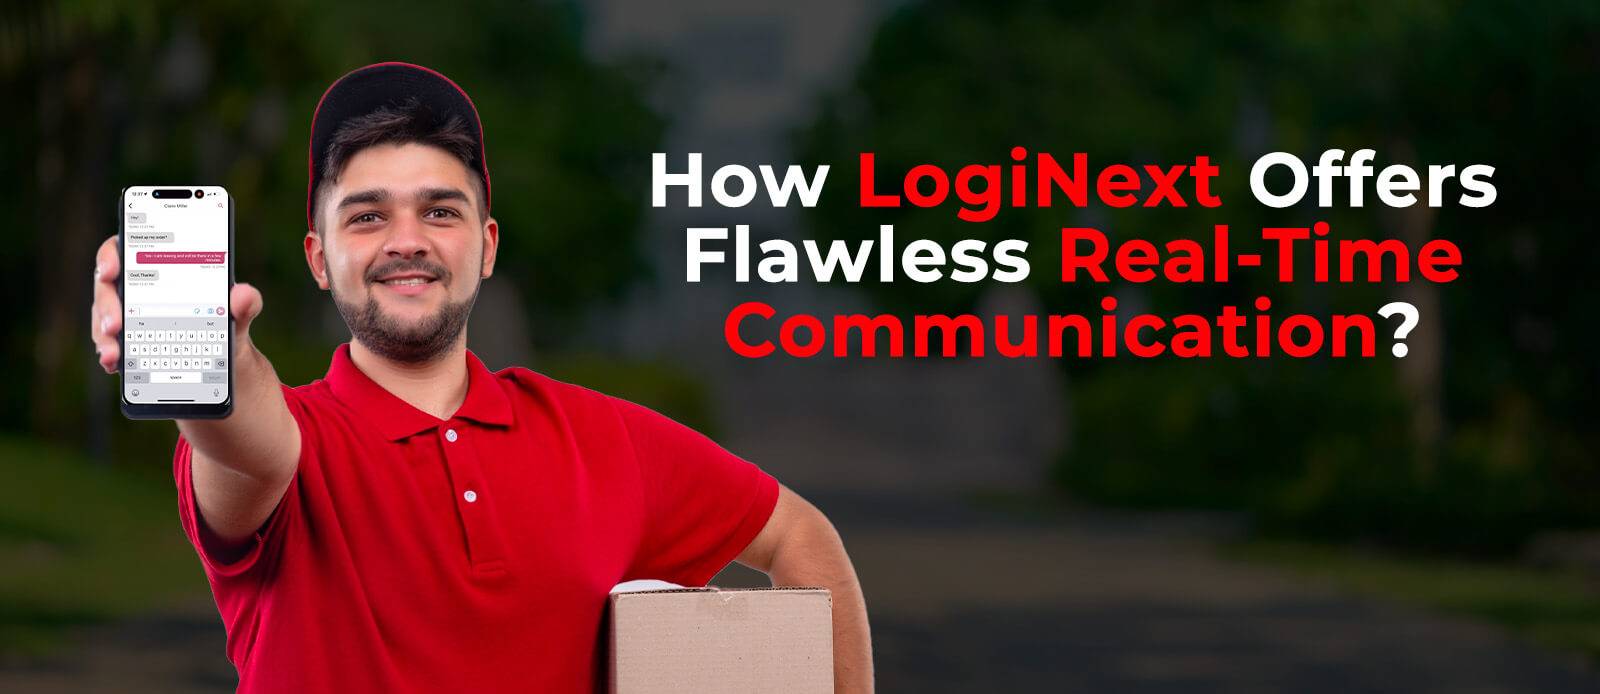 How LogiNext Offers Flawless Real-time Communication